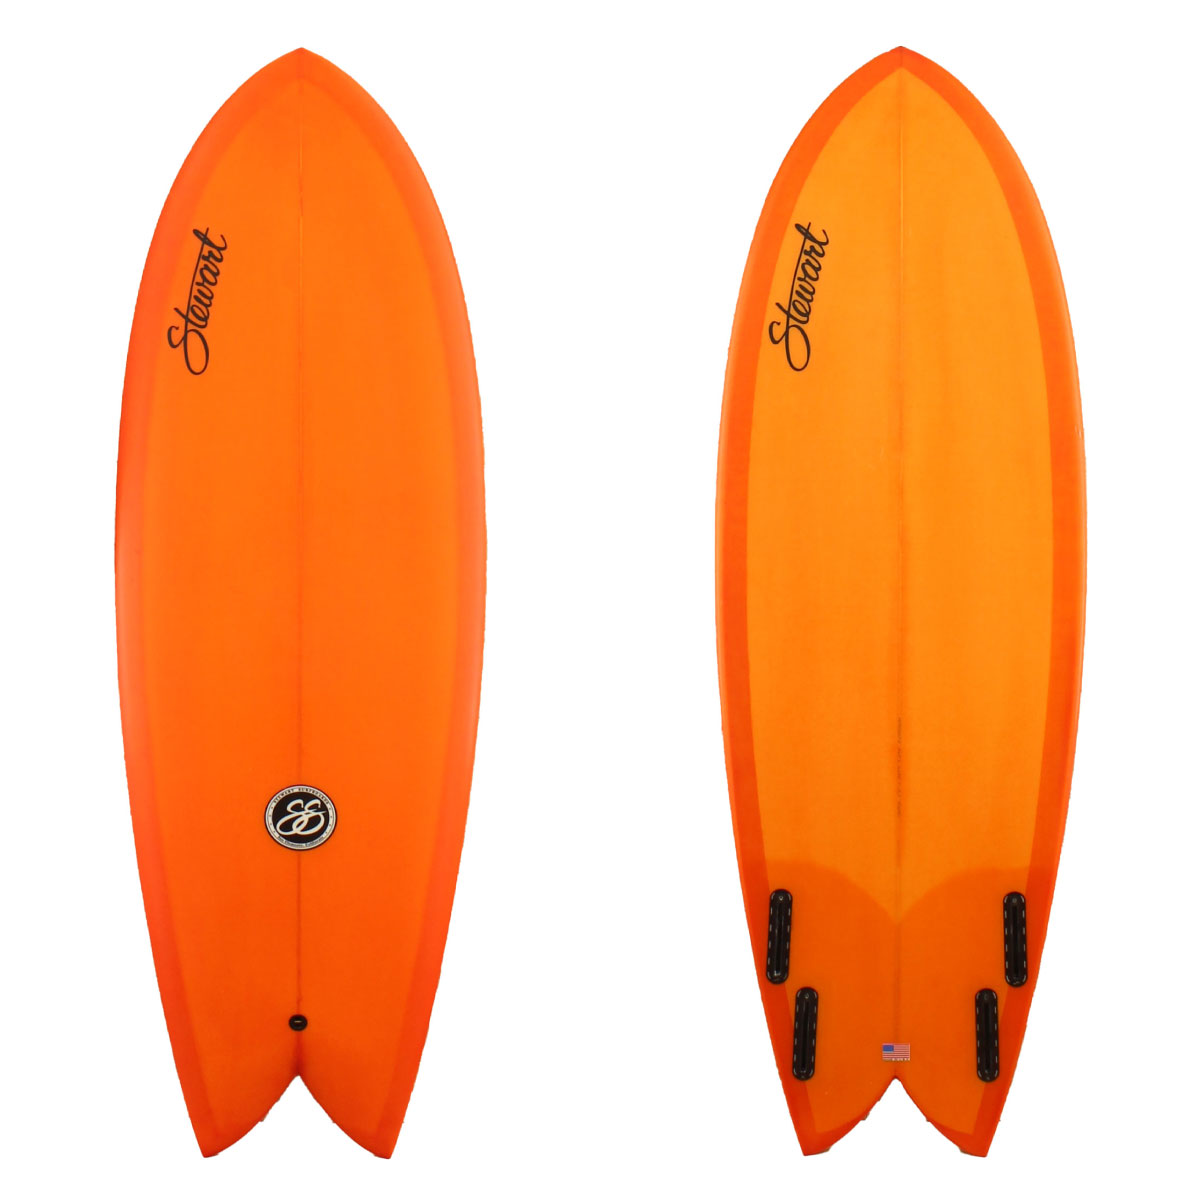 Stewart Surfboards 5'8" Retro Fish with solid orange resin tint deck and bottom